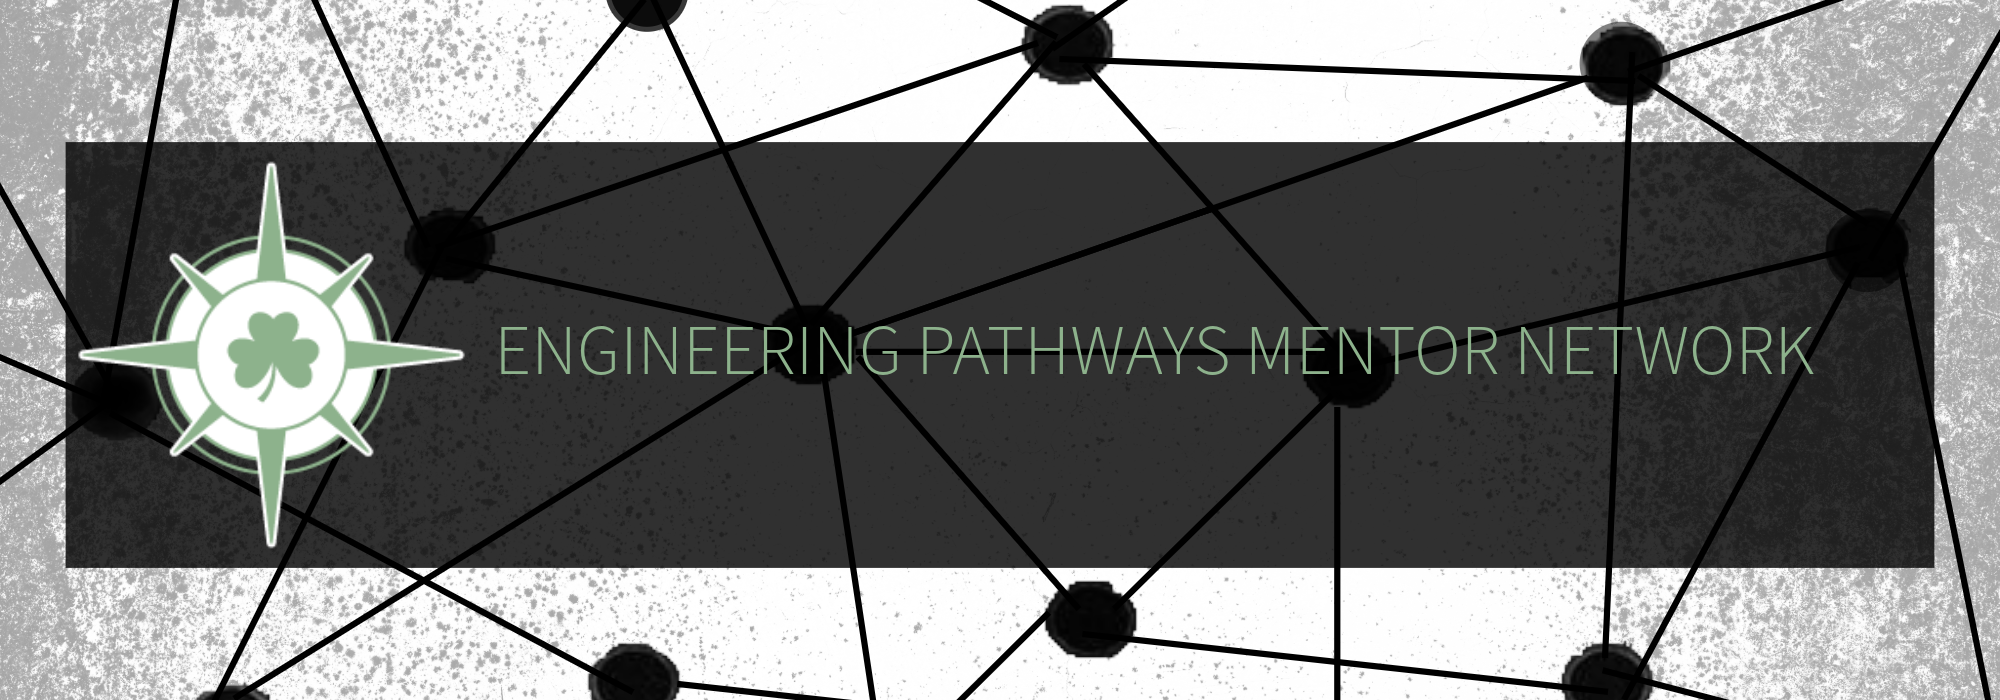 Green text reading "Engineering Pathways Mentor Network" on a background of black circles connected by a web of lines